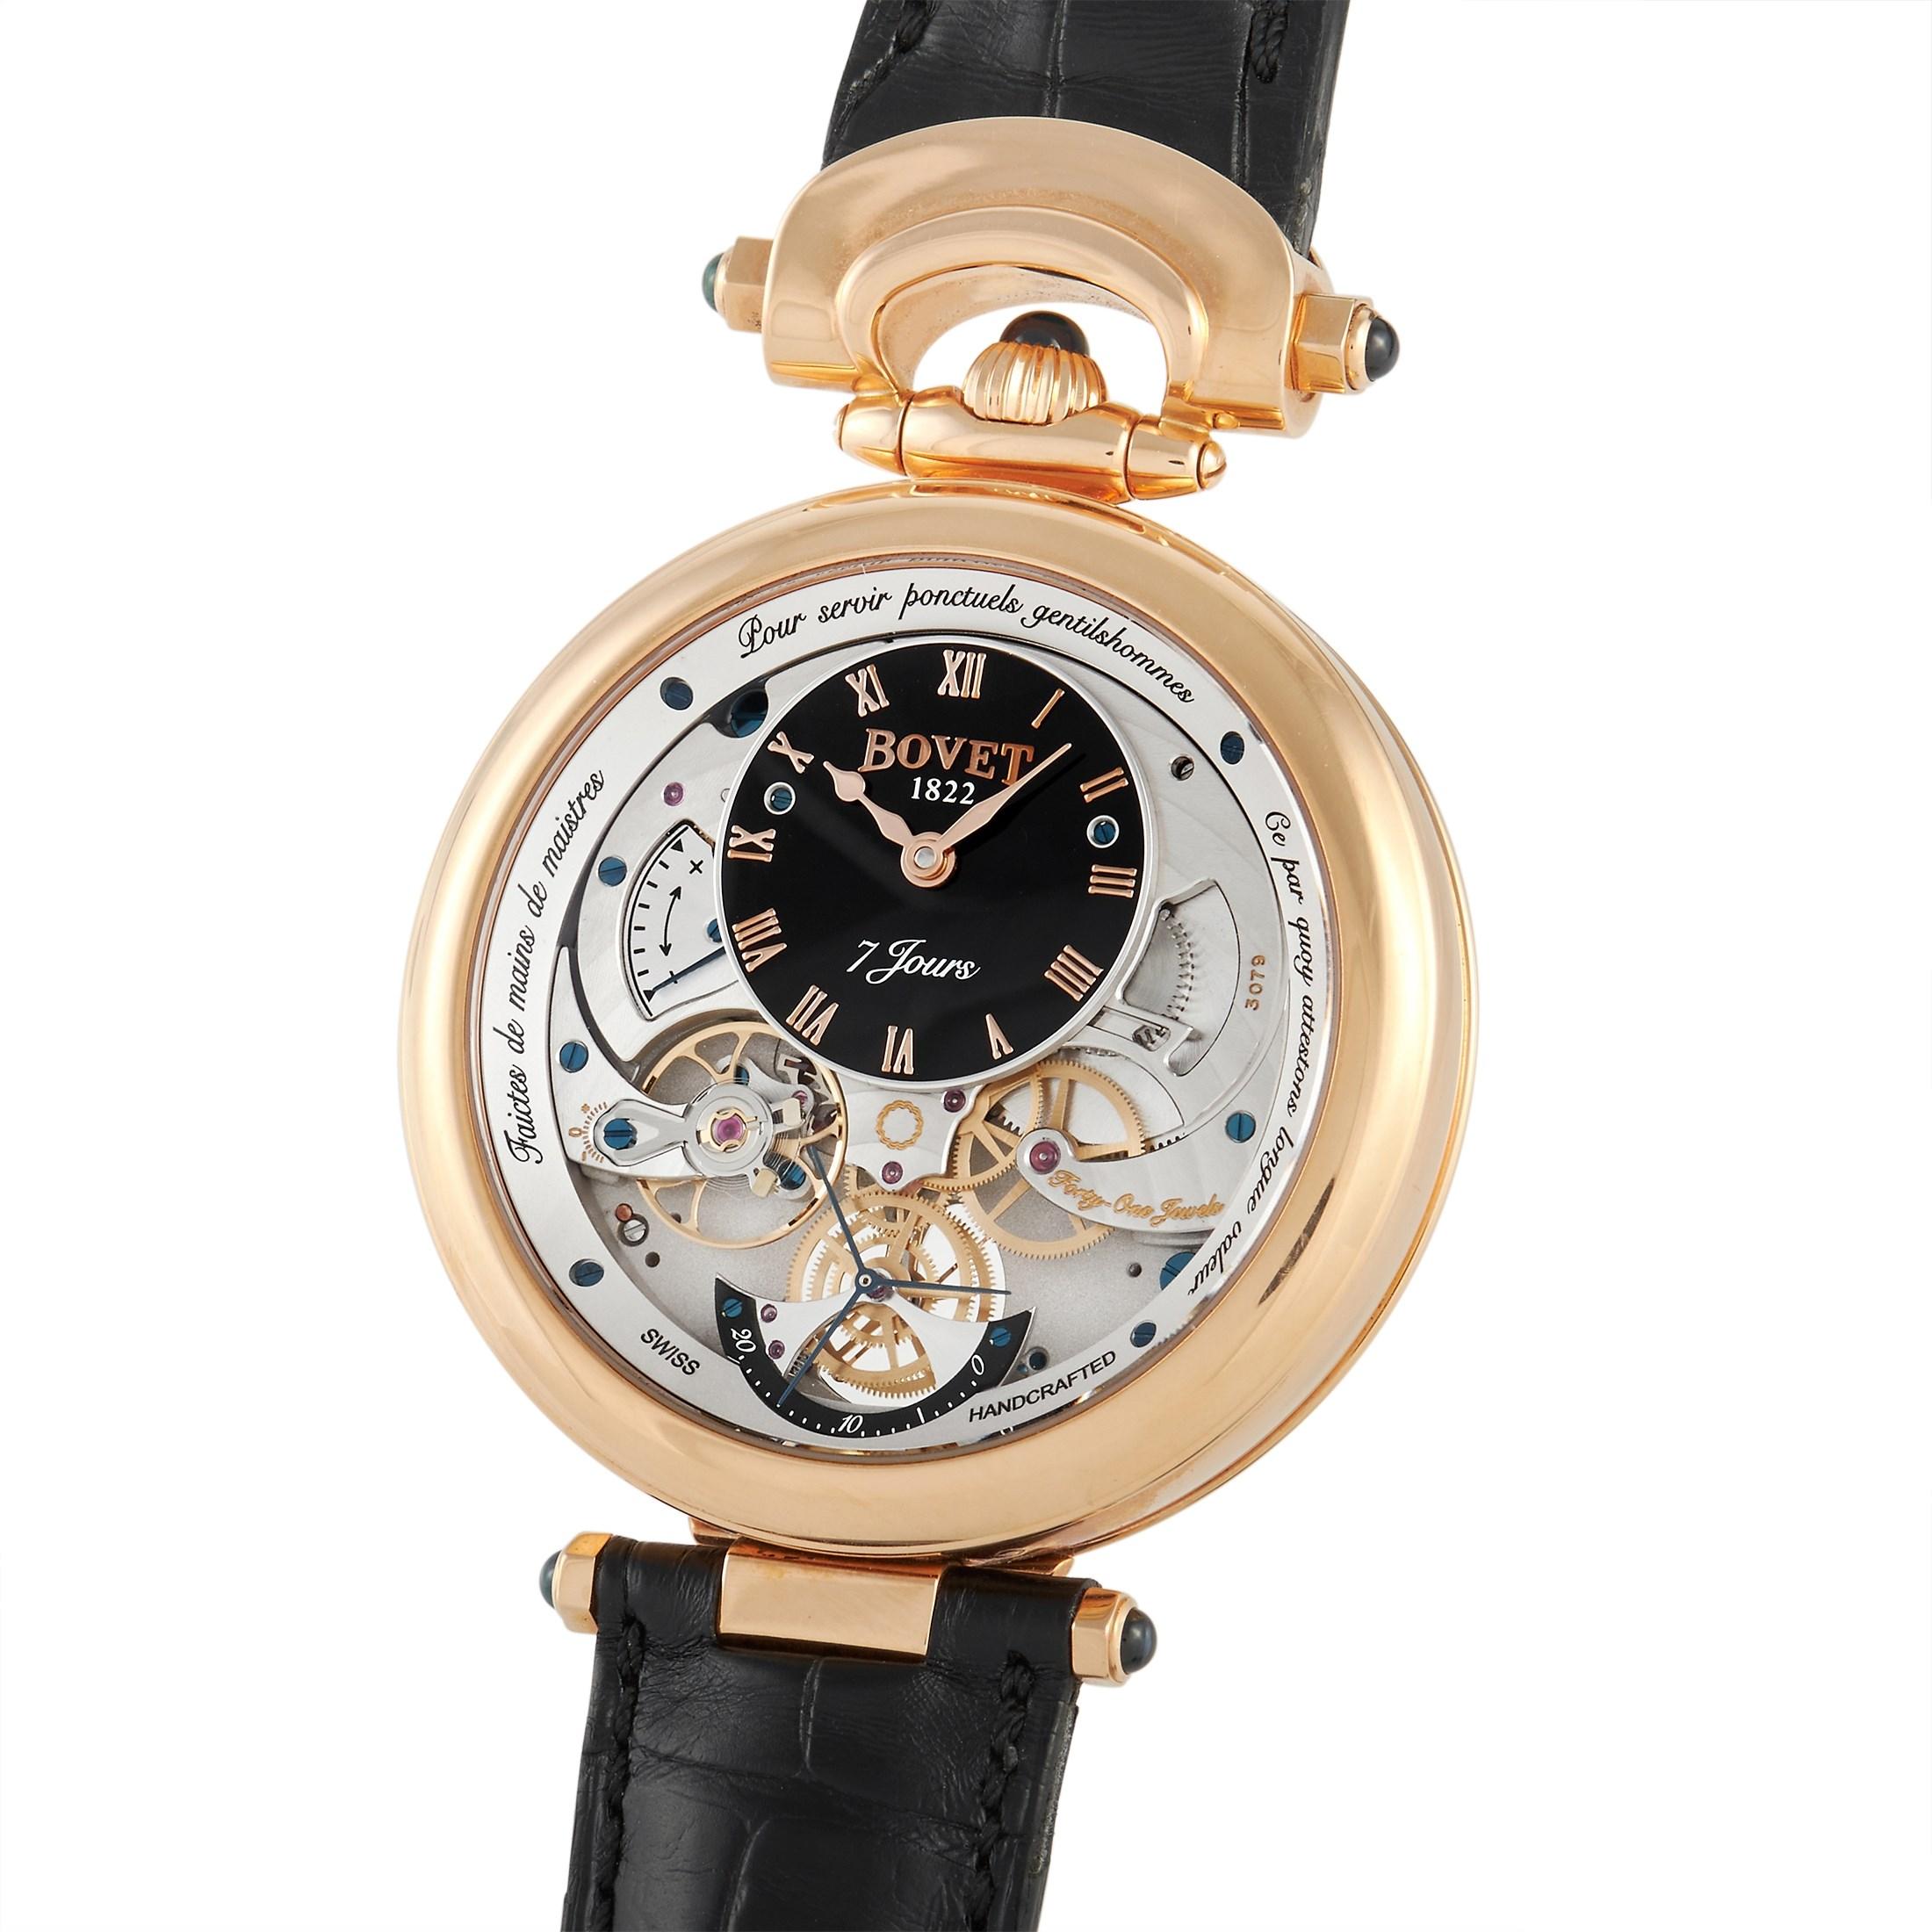 Renowned for its distinctive design, the Bovet Fleurier Complications Monsieur Watch AI43003 features two dials. The one with black dial features fine gold Roman numerals, wavy hour and minute hands, and a seconds counter sub-dial with a distinctly